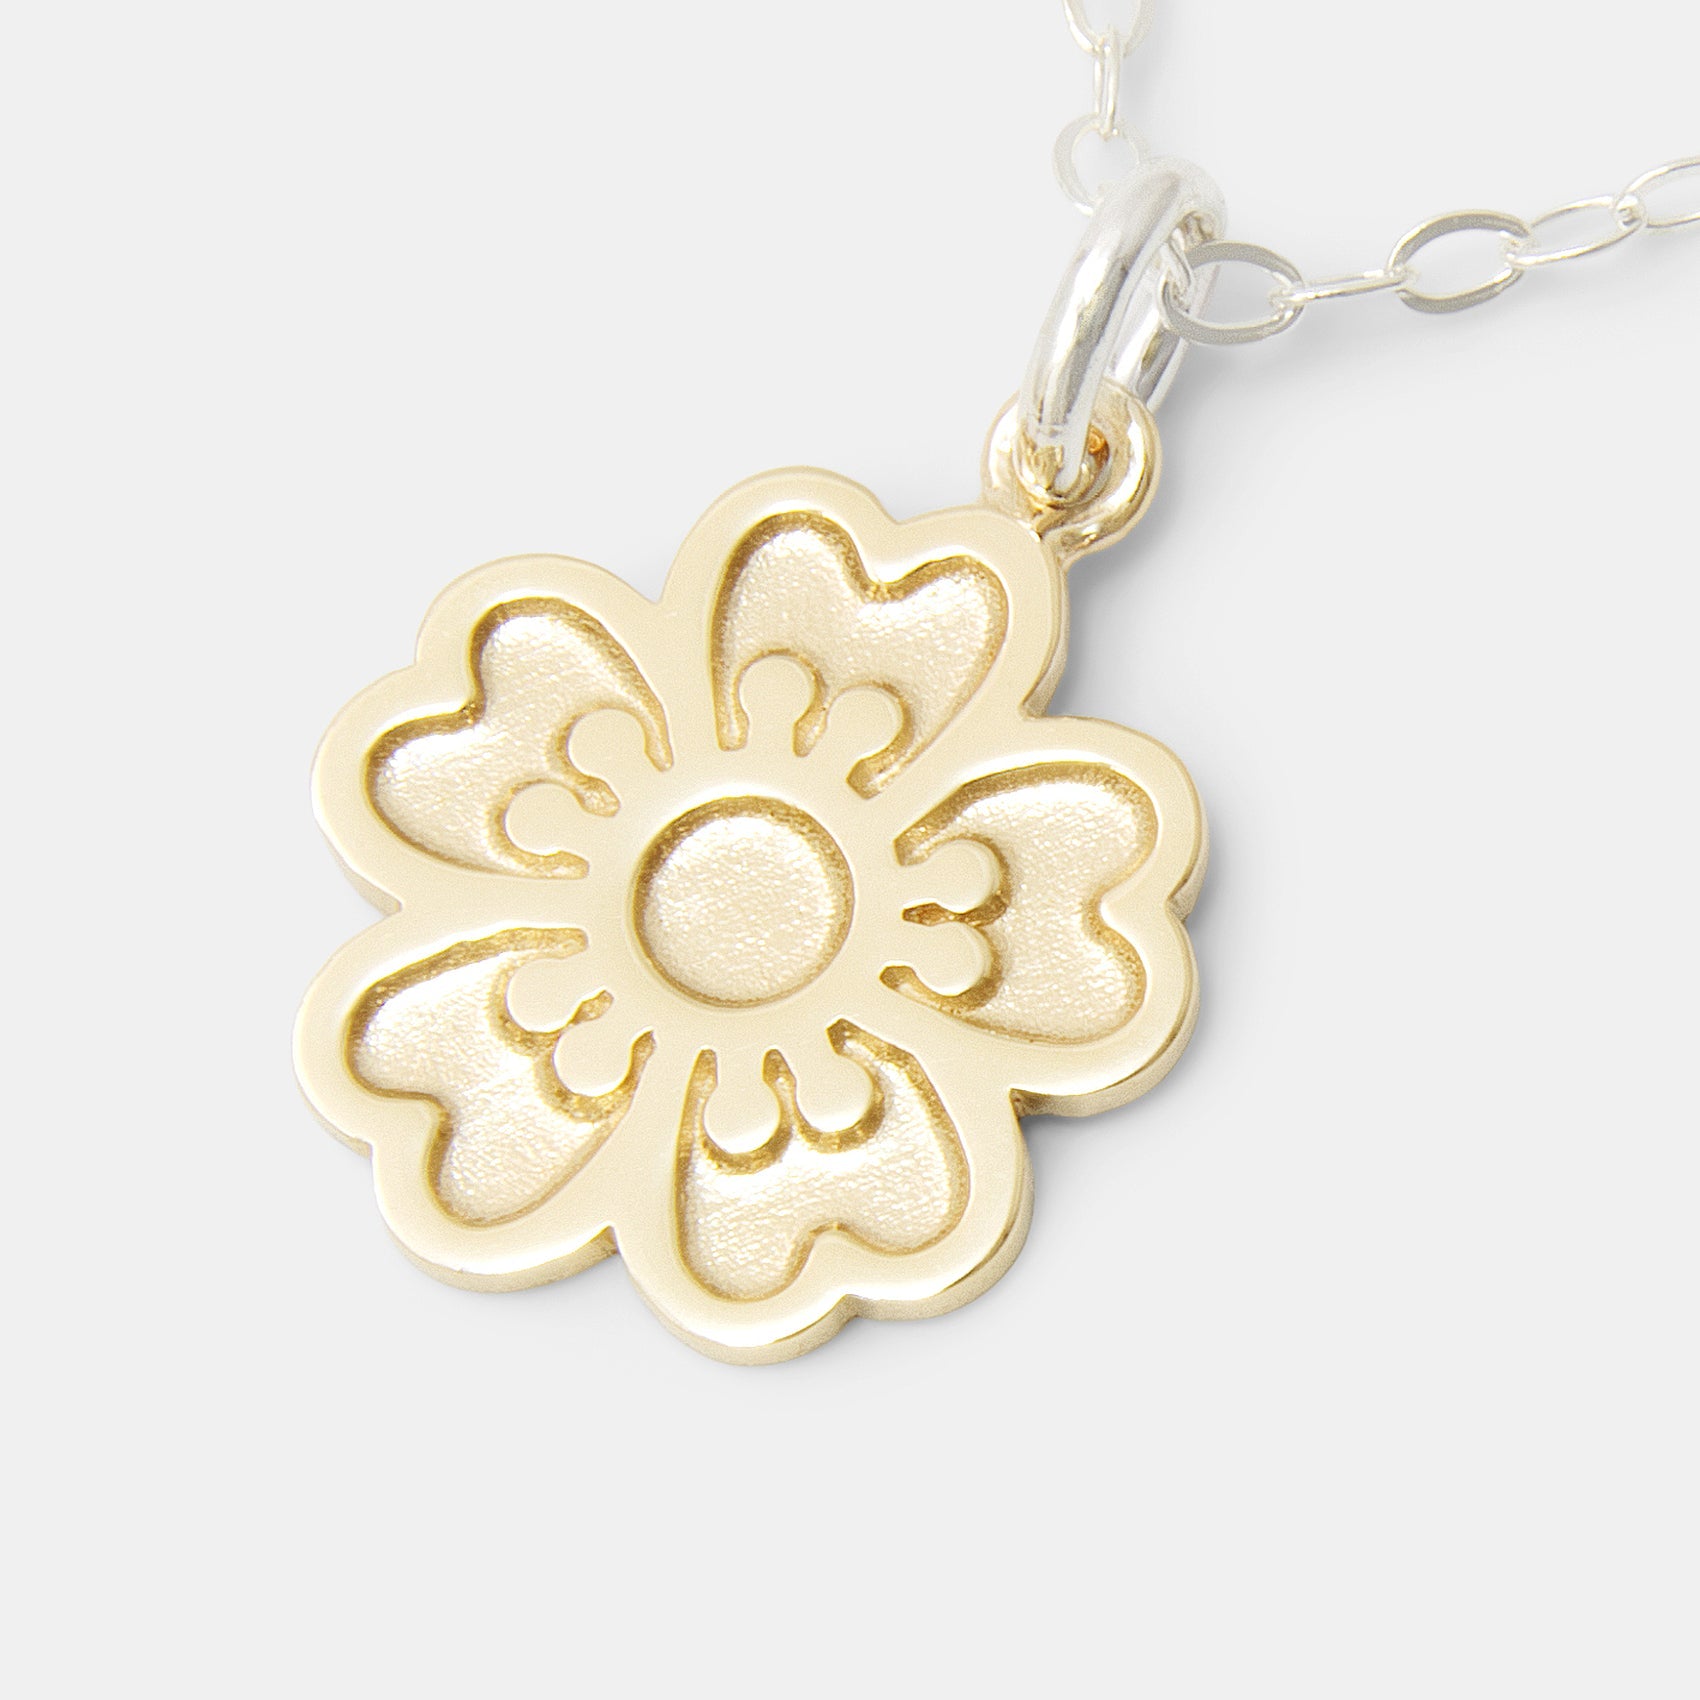 Guinea Flower Solid Gold Pendant on Silver Necklace - Simone Walsh Jewellery Australia